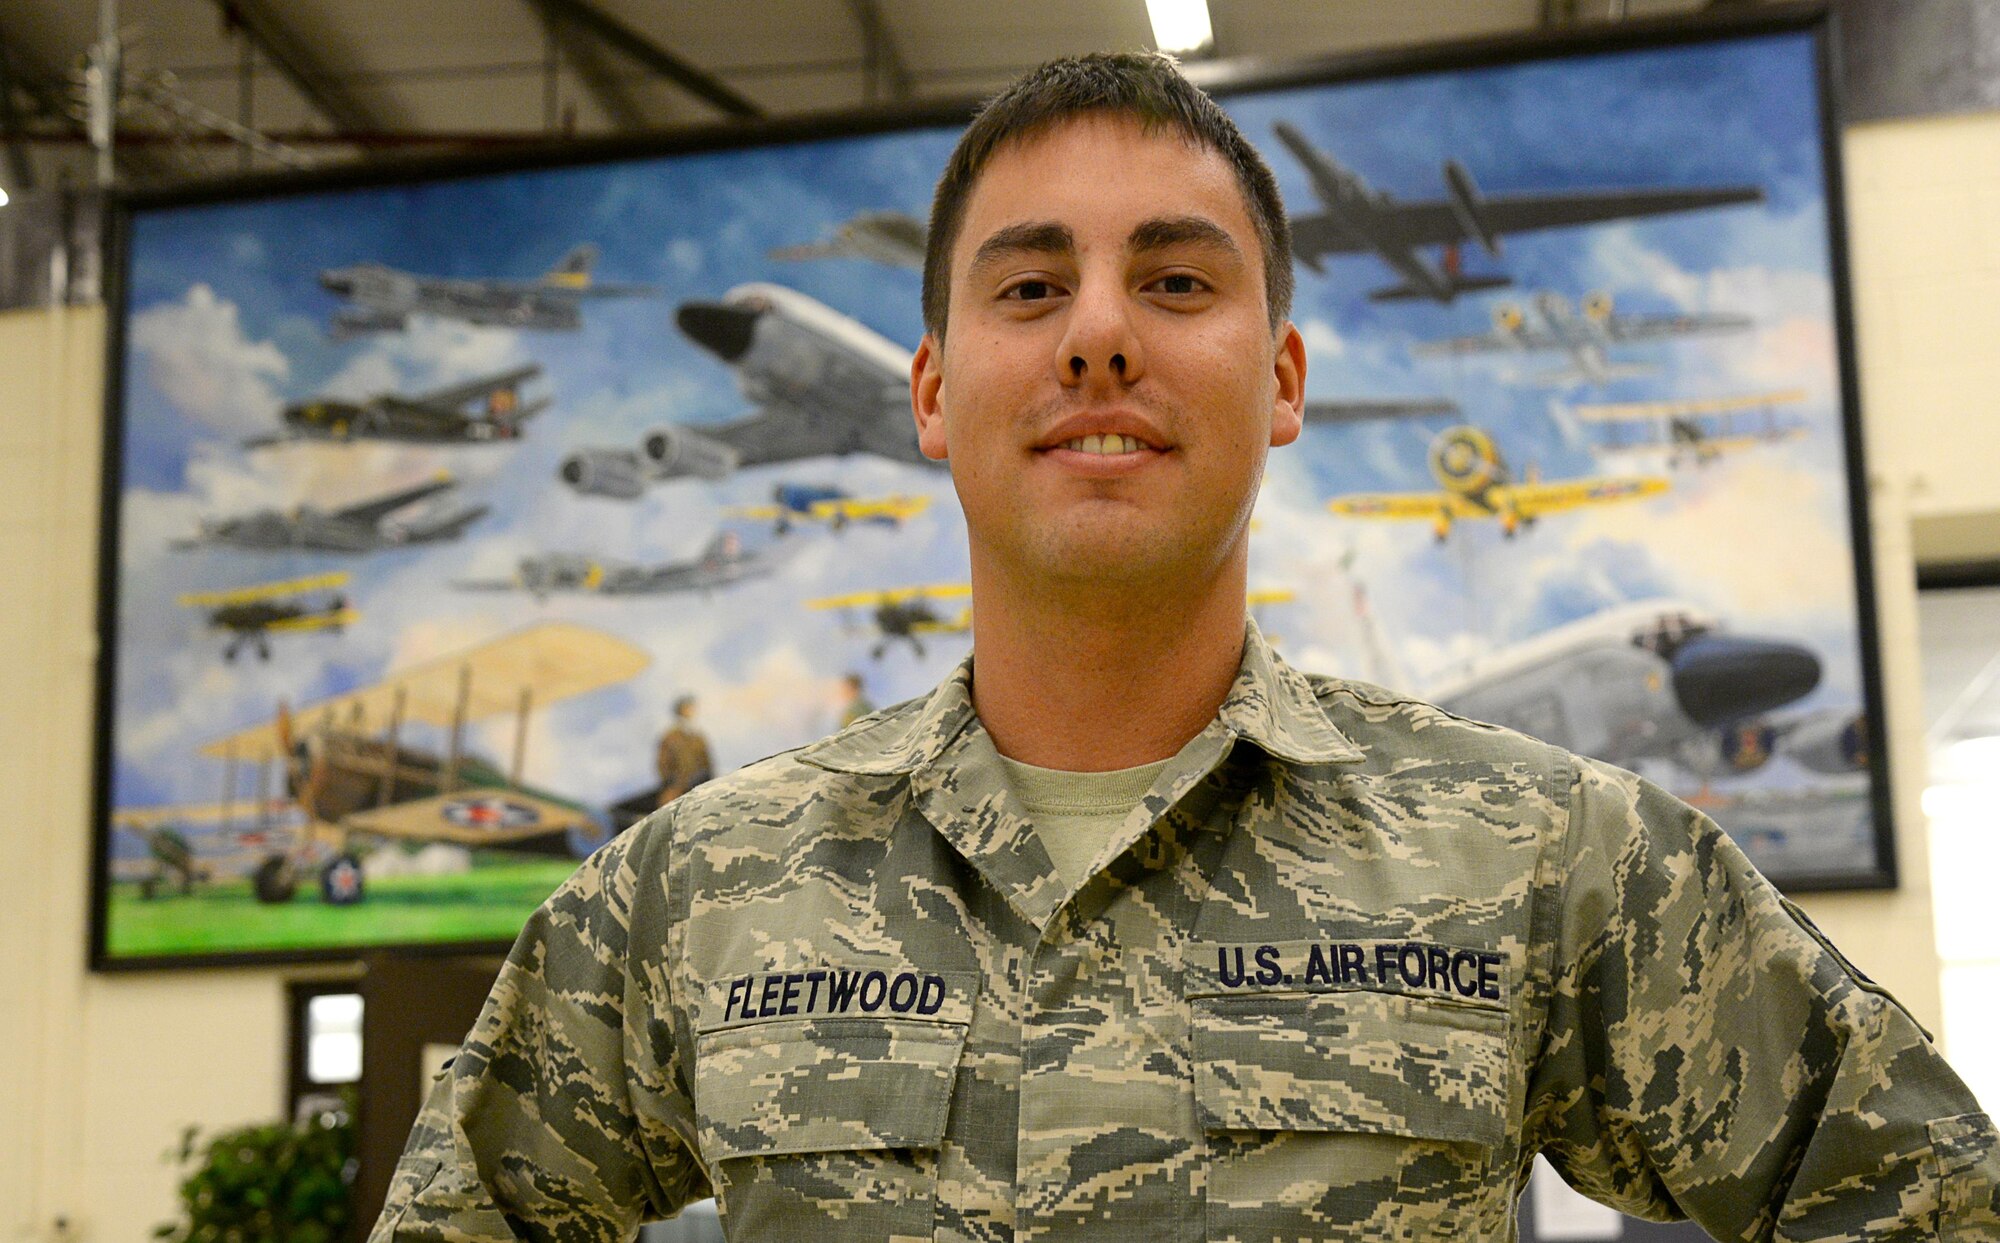 U.S. Air Force Staff Sgt. William Fleetwood, 95th Reconnaissance Squadron aerospace maintenance craftsman, poses for a photograph Nov. 3, 2016, on RAF Mildenhall, England. Fleetwood earned the SquareD Spotlight for exhibiting the Air Force core value, Service Before Self. (U.S. Air Force photo by Senior Airman Justine Rho)